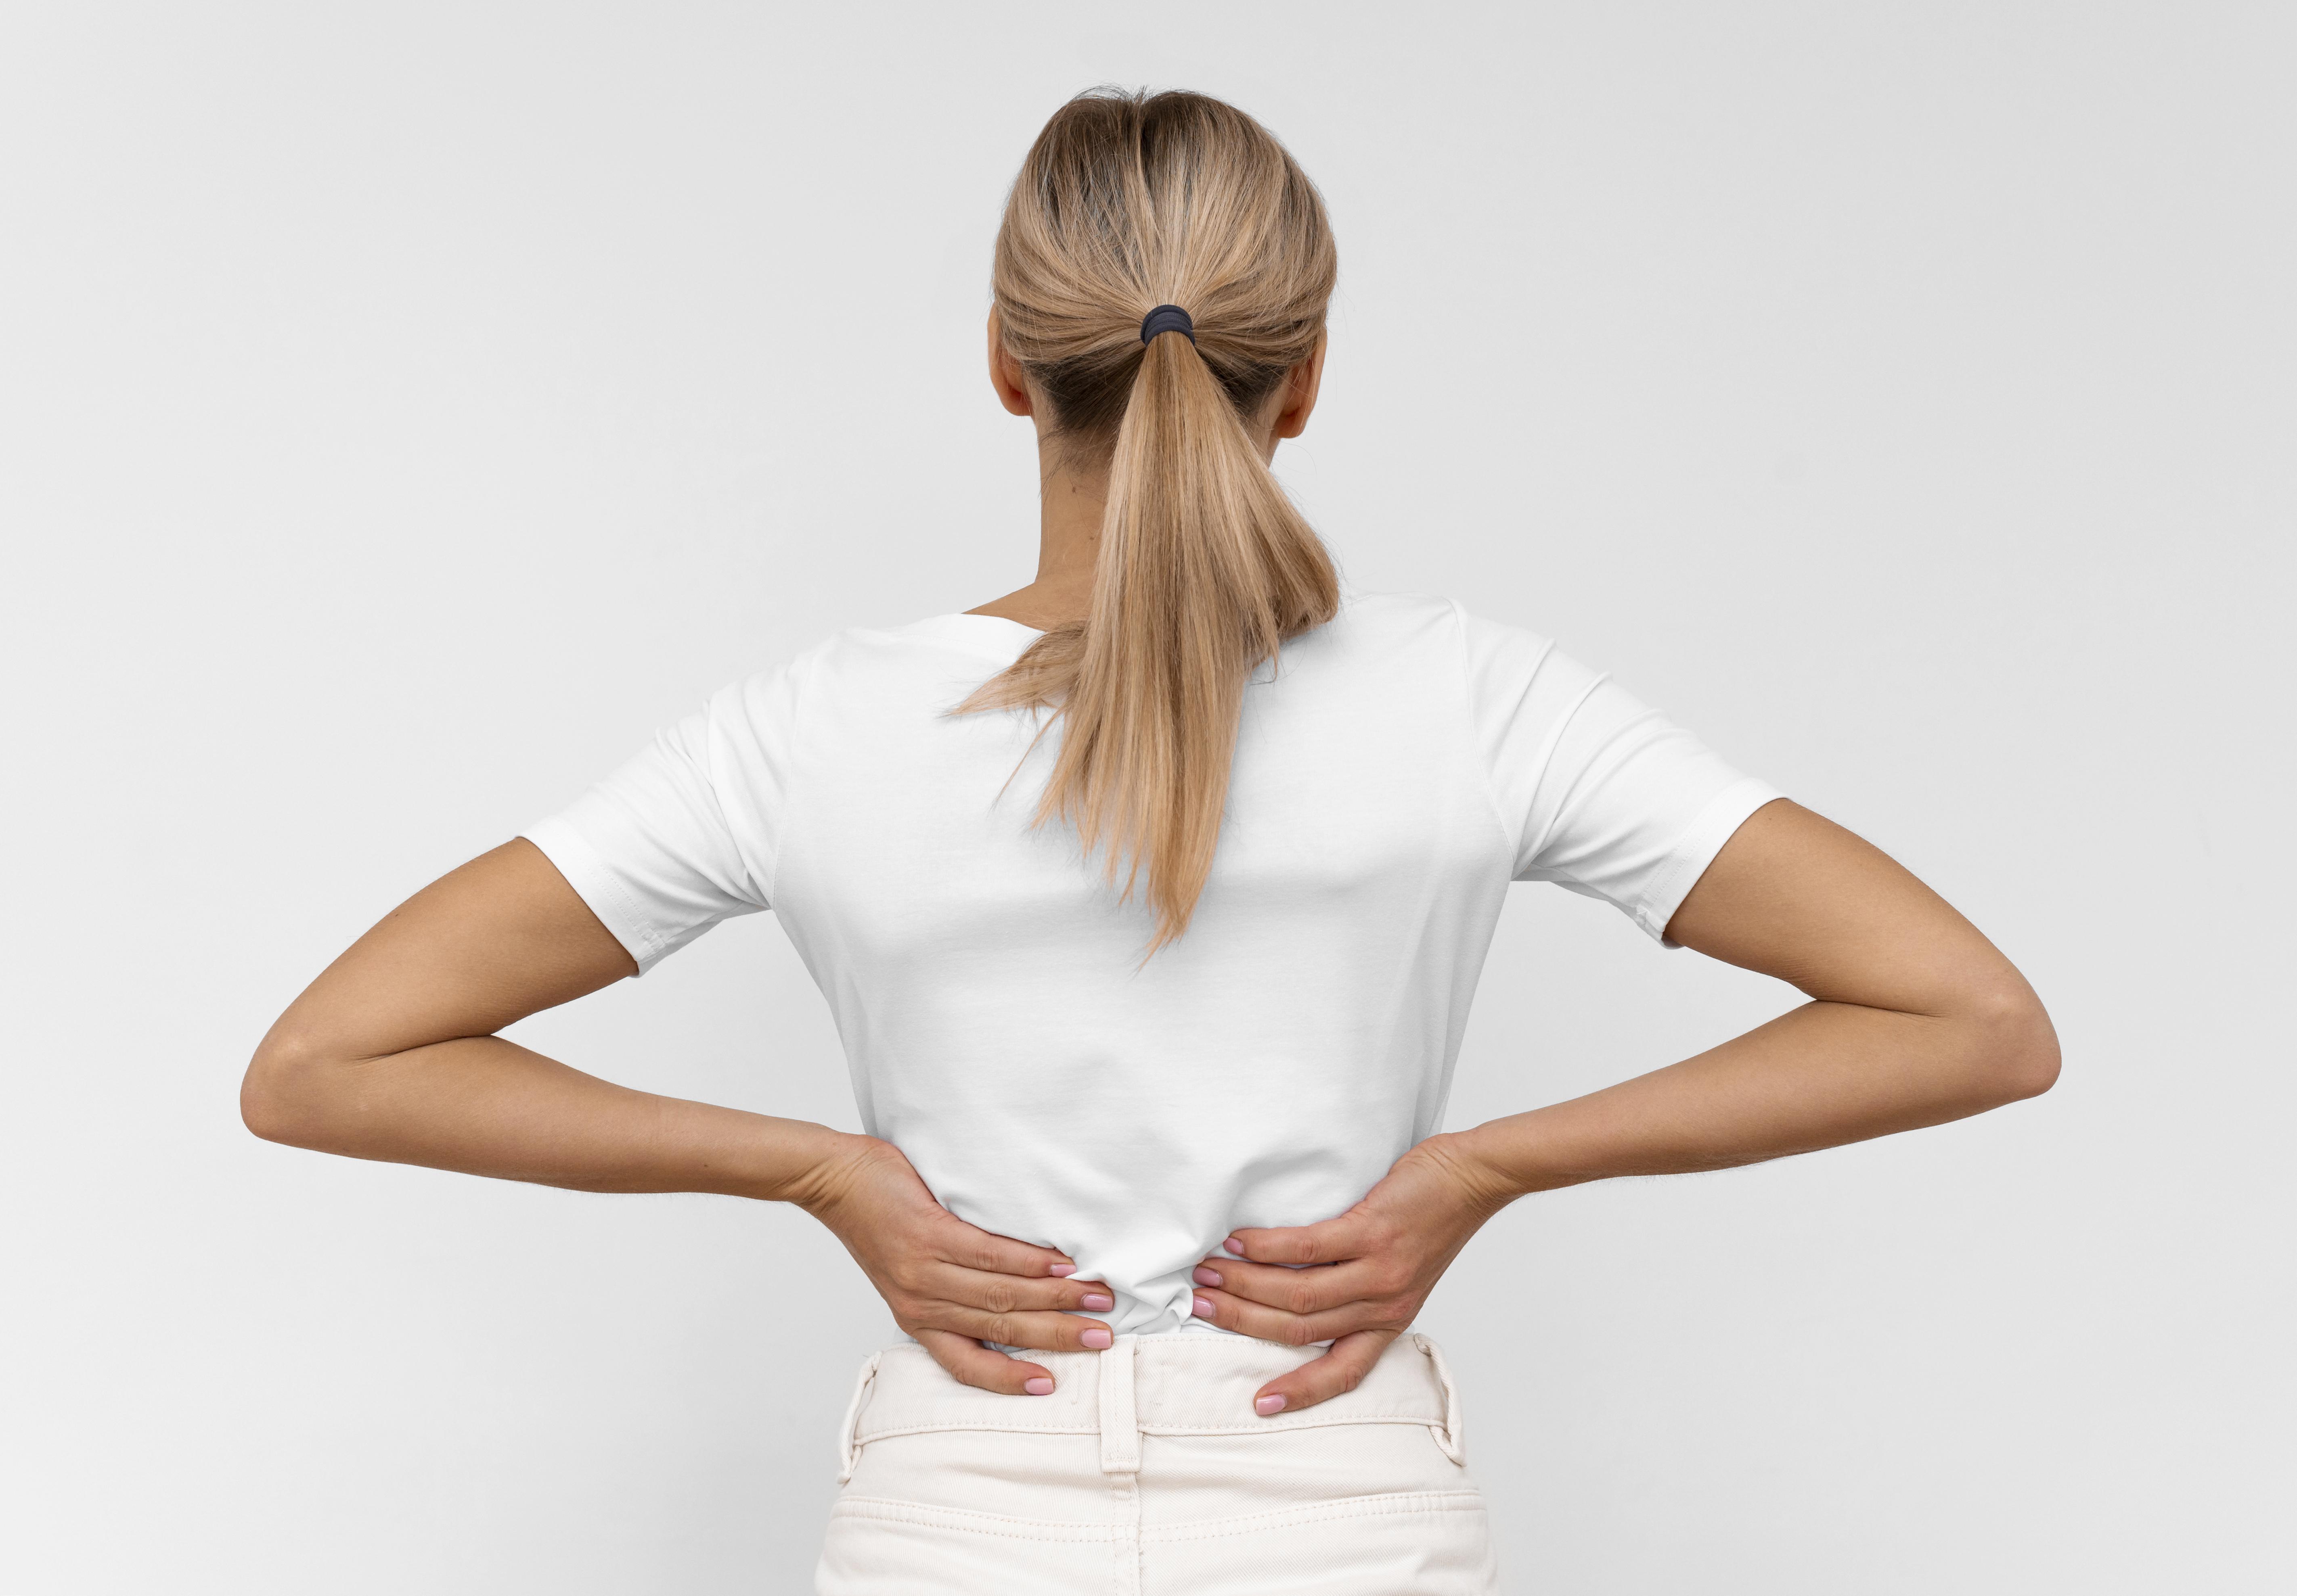 Causes and Risk Factors of Back Pain